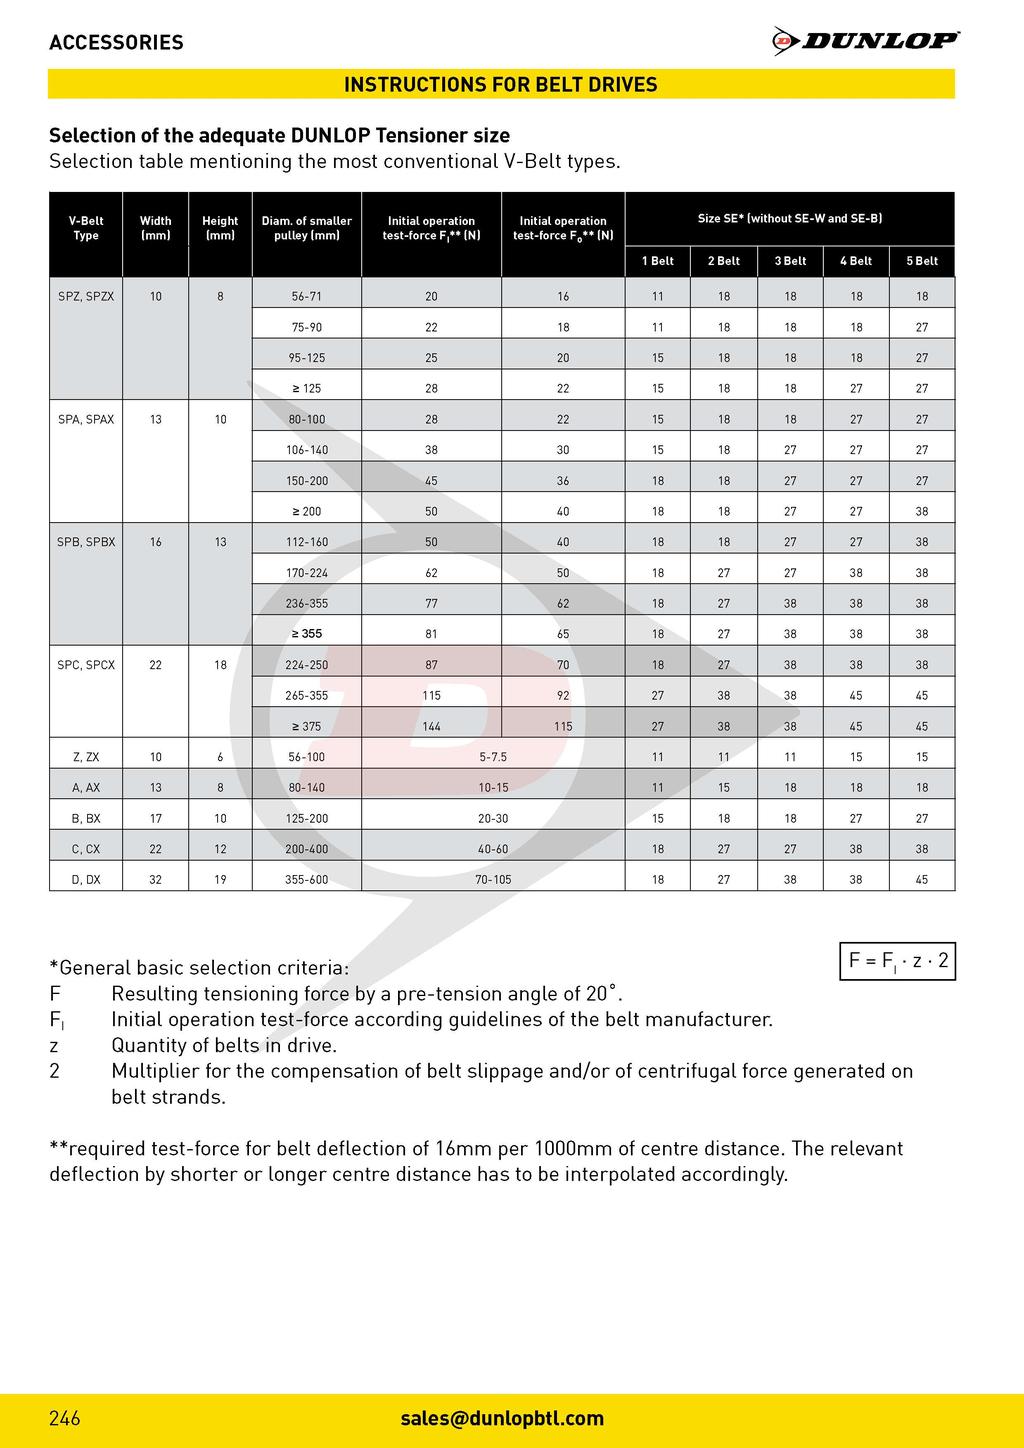 ACCESSORIES INSTRUCTIONS FOR BELT DRIVES Selection of the adequate DUNLOP Tensioner size Selection table mentioning the most conventional V-Belt types. V-Belt Type Width (mm) Height (mm) Diam.